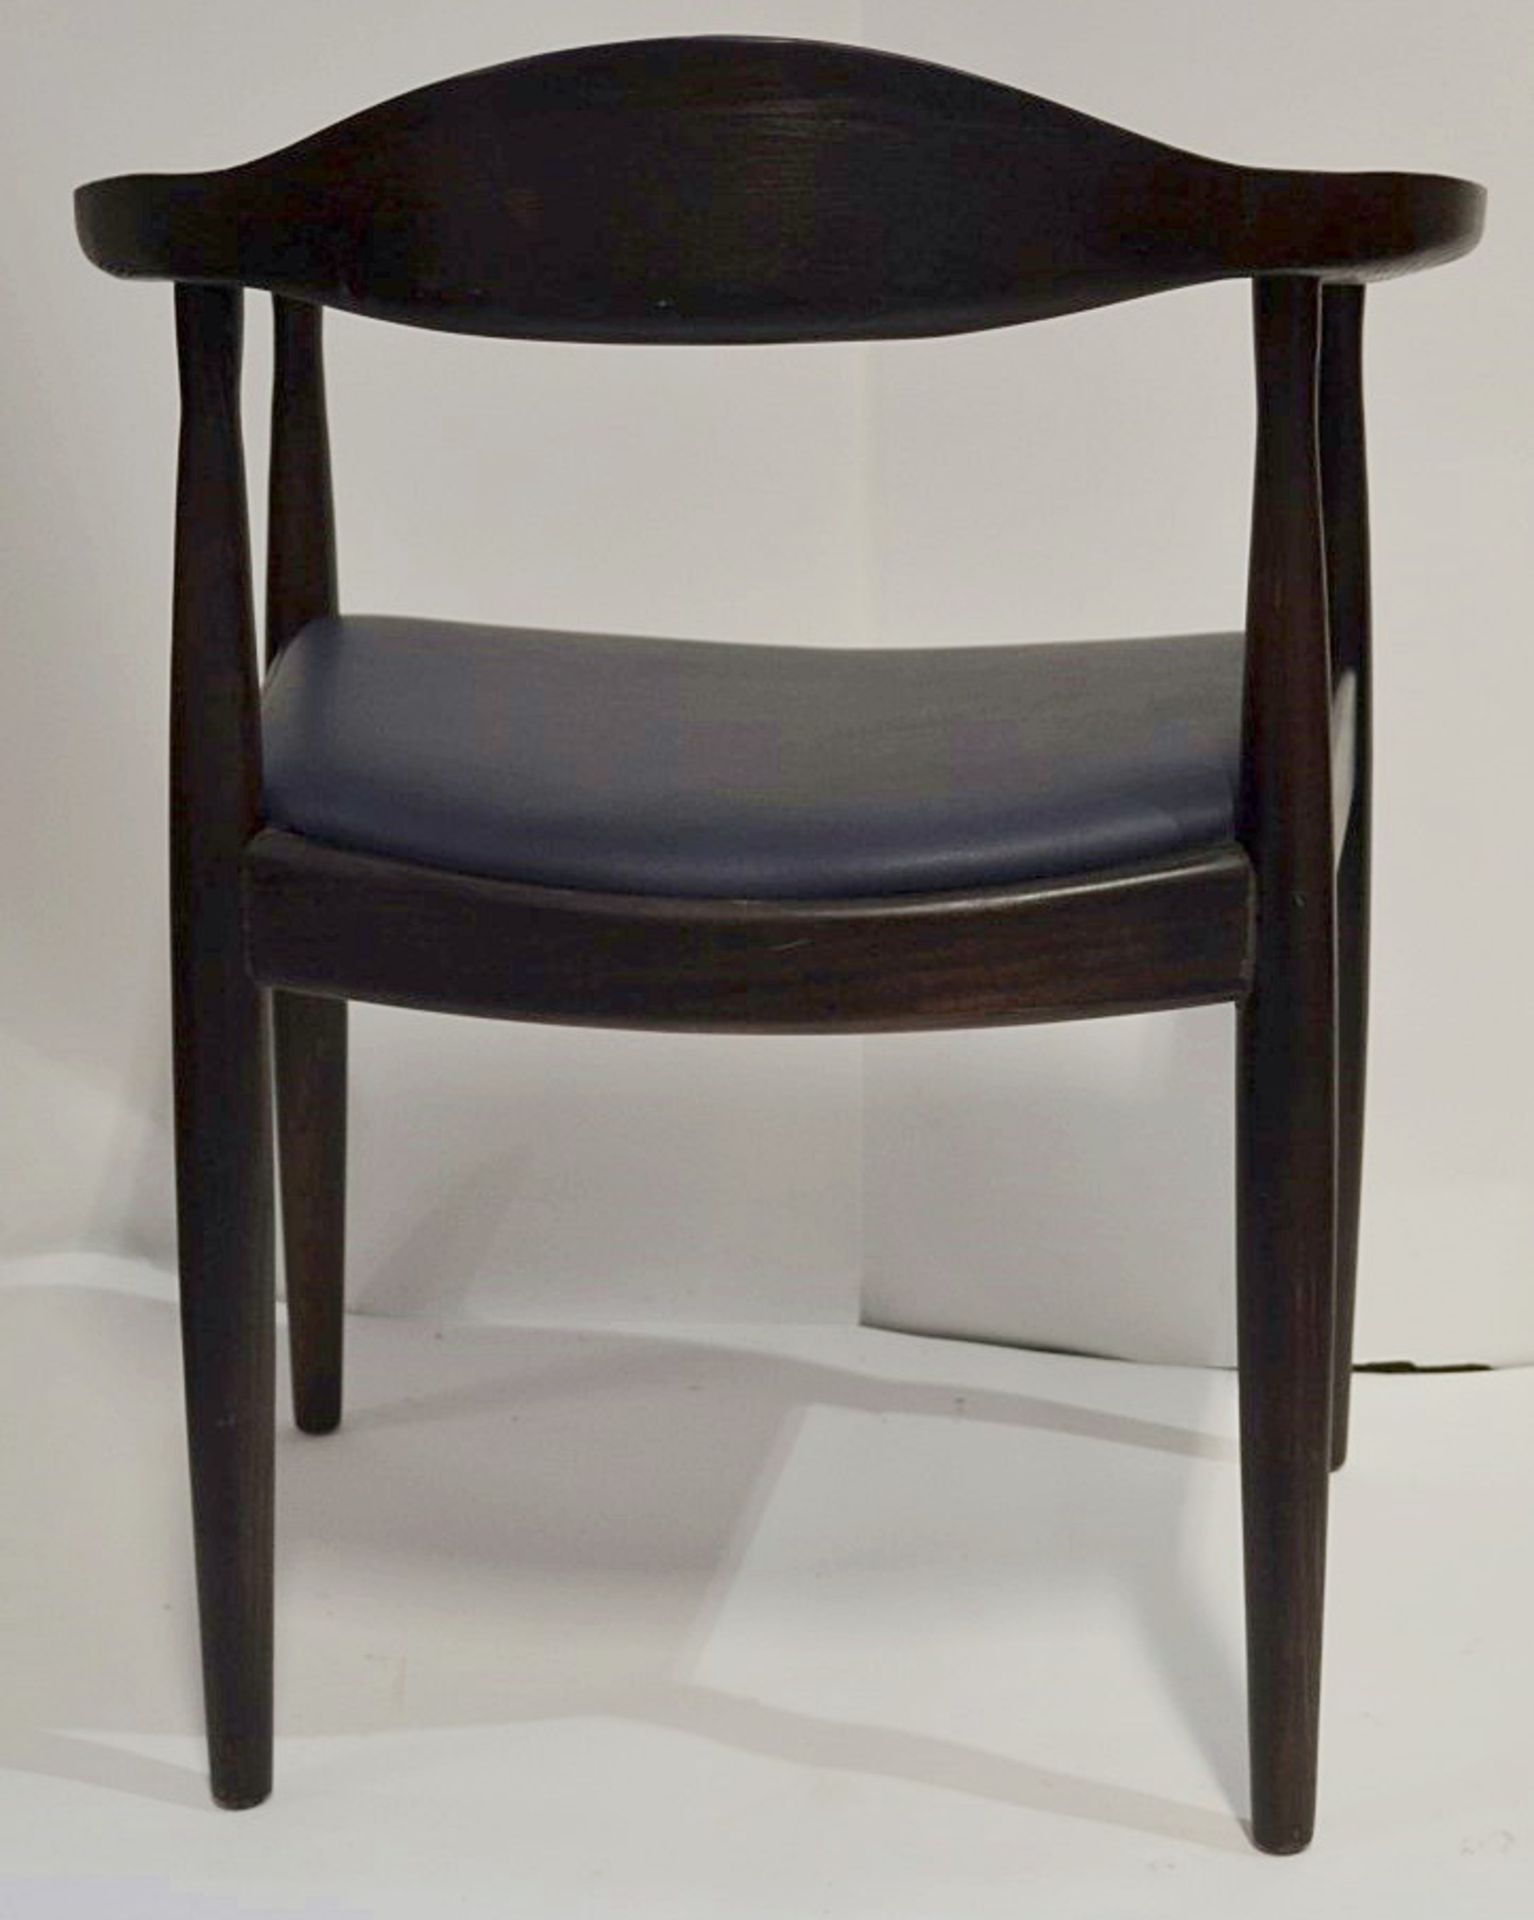 6 x Wooden Dining Chairs With Upholstered Seats - Dimensions: H78 x W64 x D57cm, Seat Height: 47cm - - Image 3 of 4